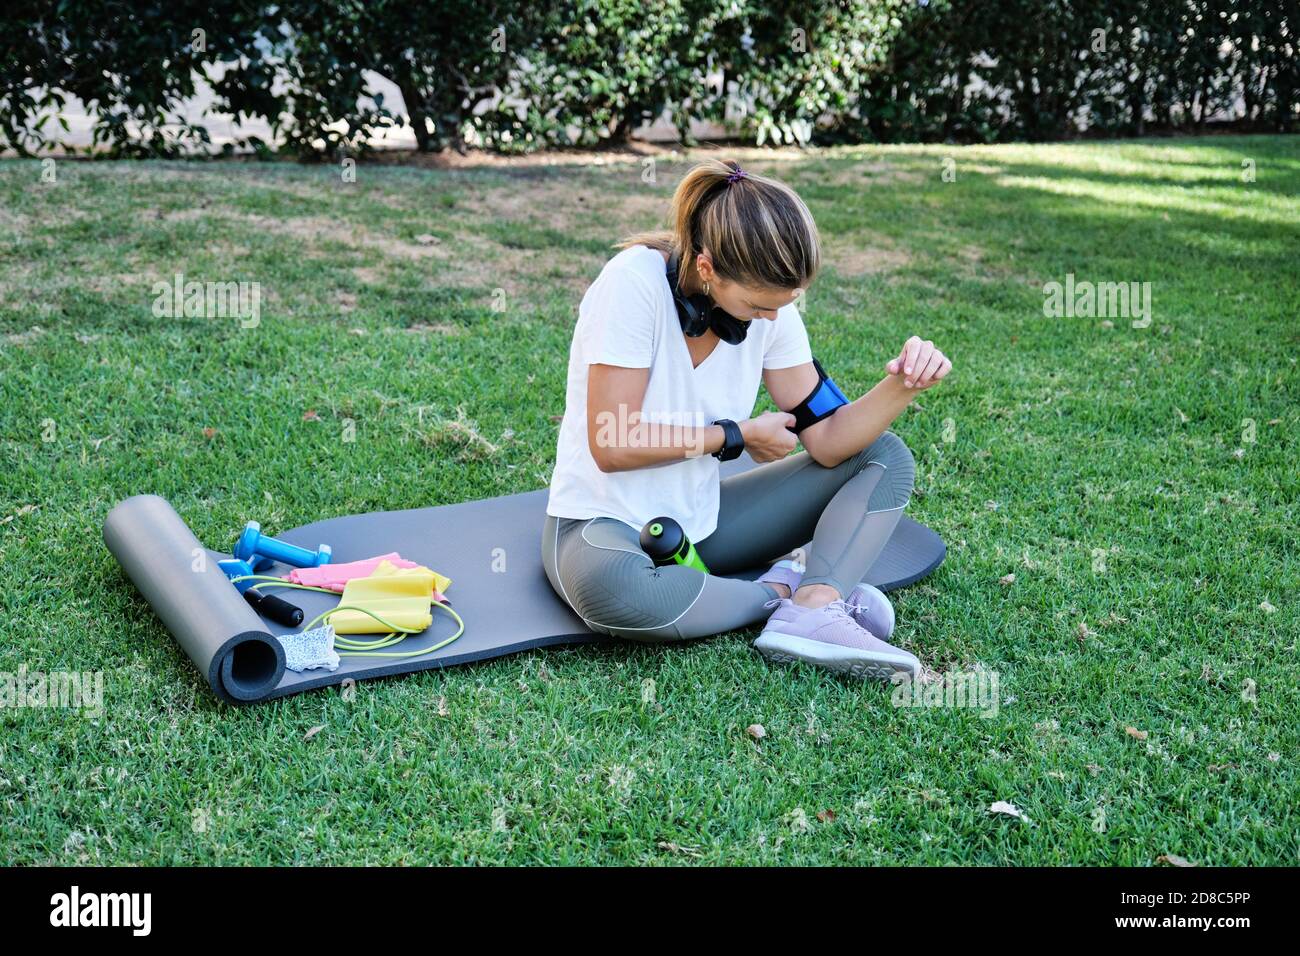 Young caucasian woman wearing her cell phone armband before exercising. Outdoor exercise concept. Stock Photo